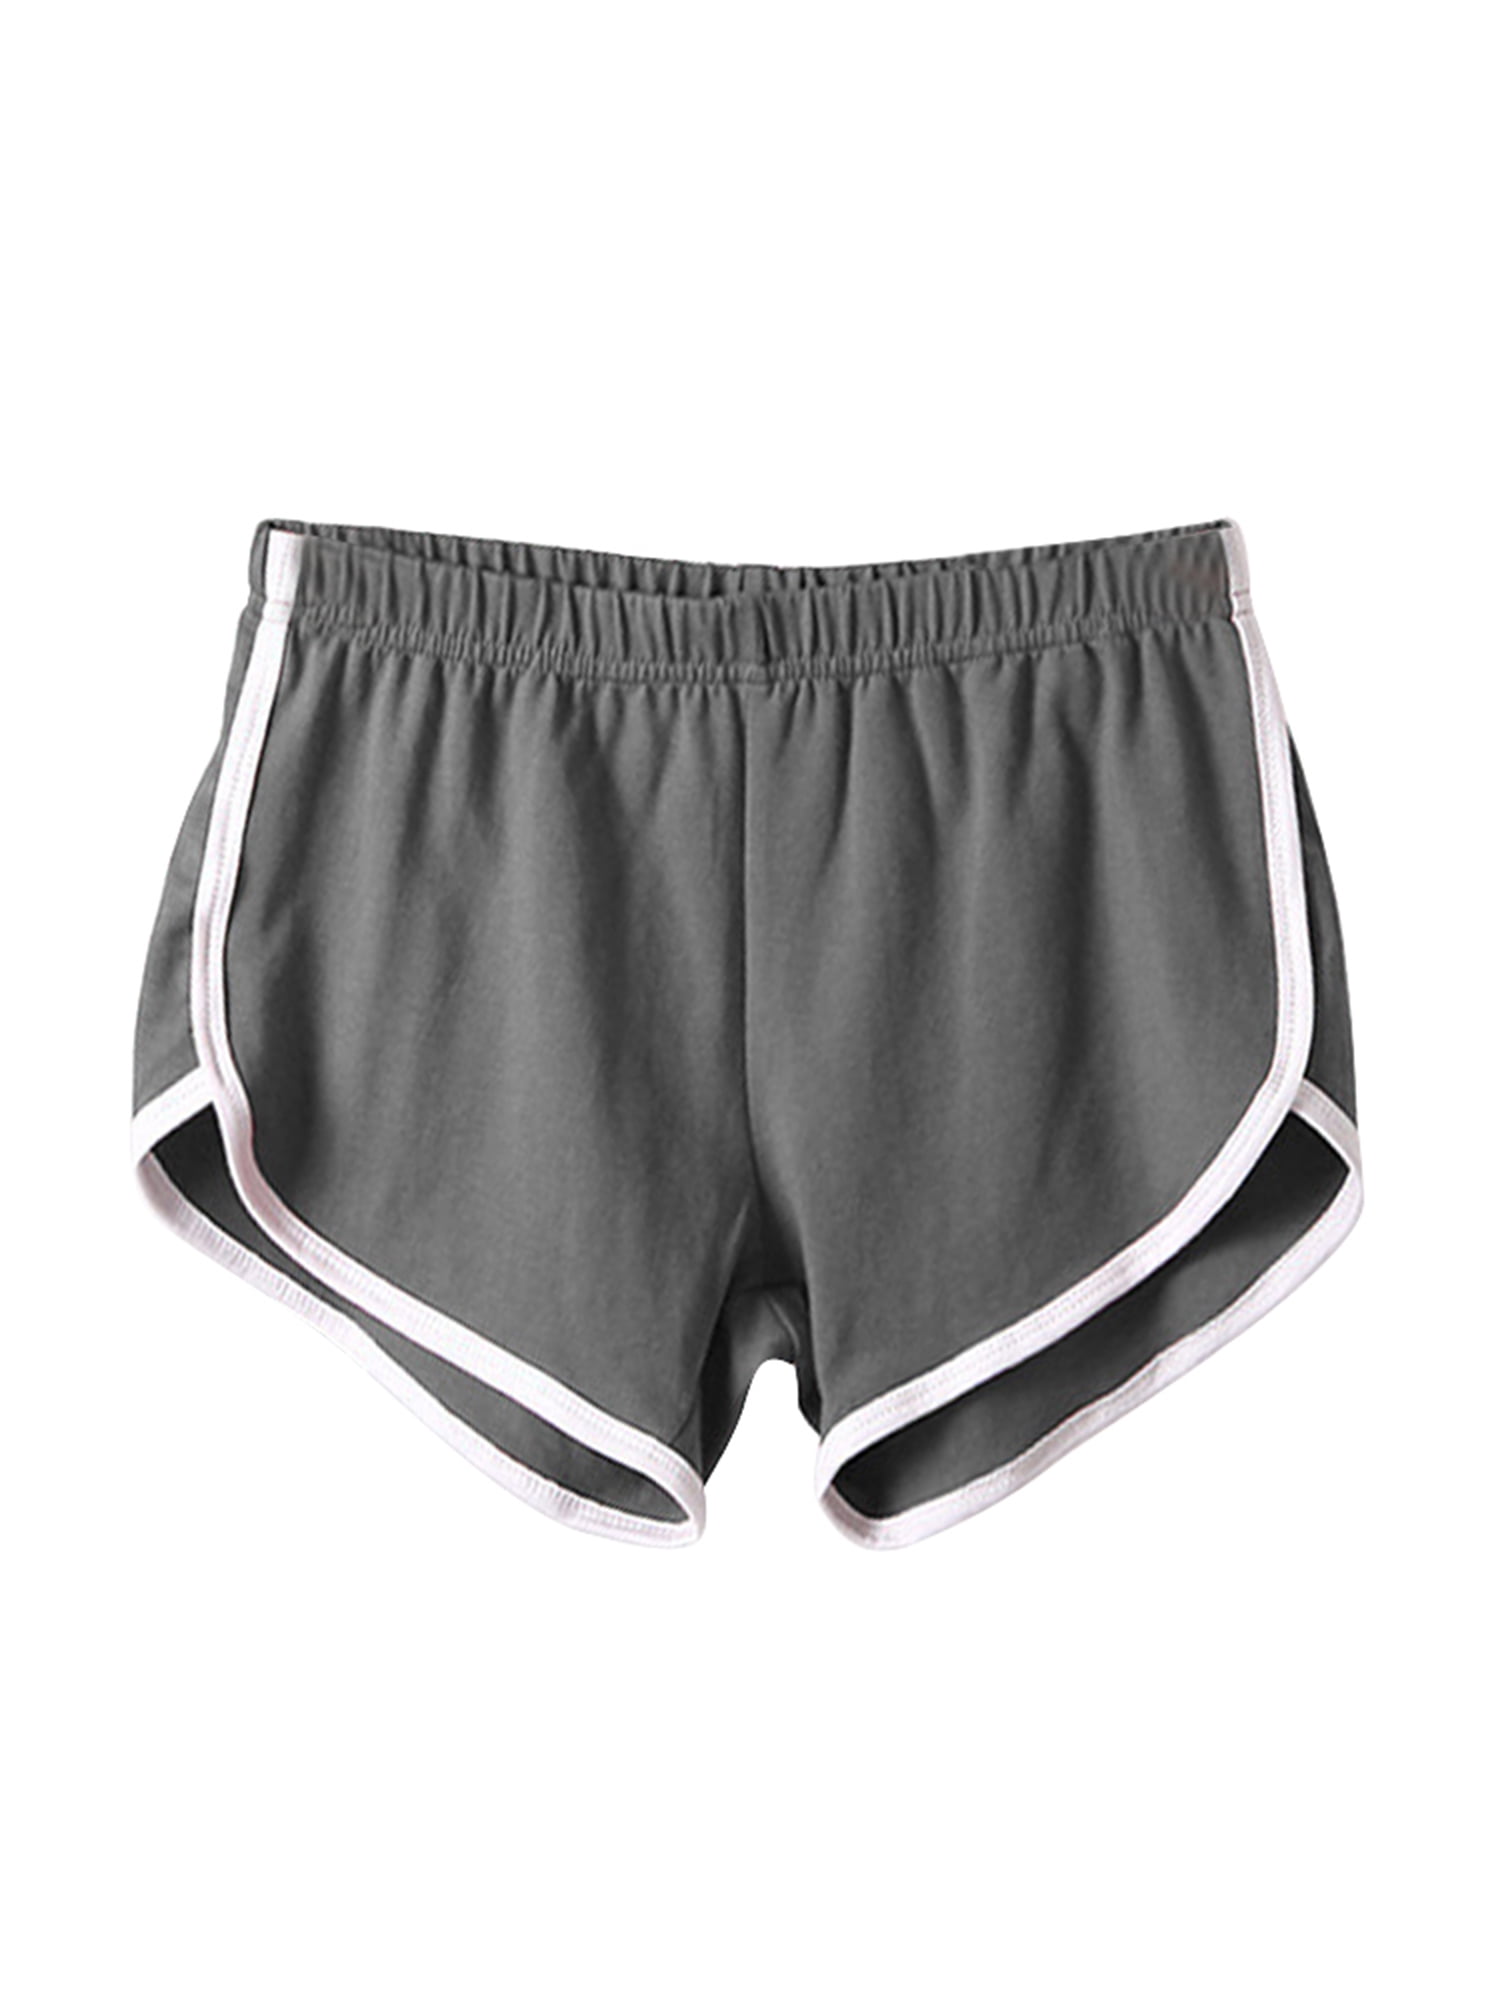 Look-It Activewear Black Cotton Shorts for Gymnastics Or Dance Girls and Women 